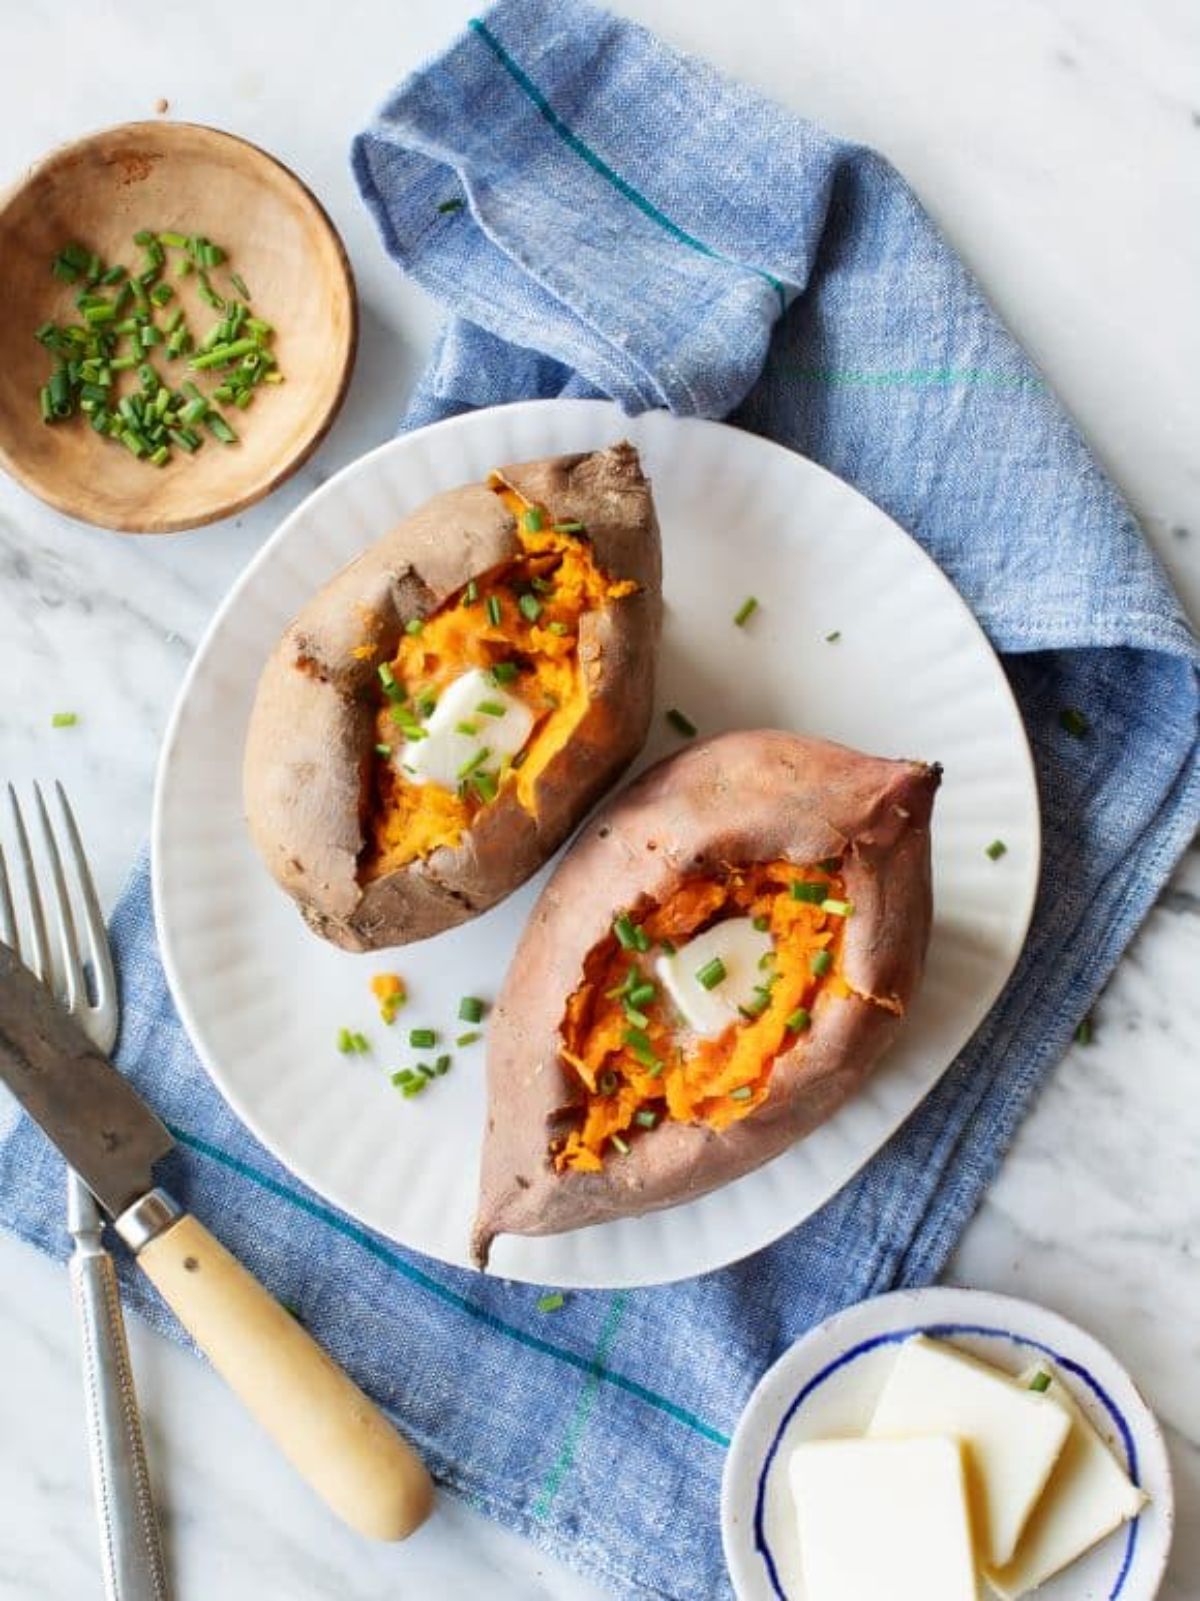 two baked sweet potatoes on round white plate with blue napkins underneath